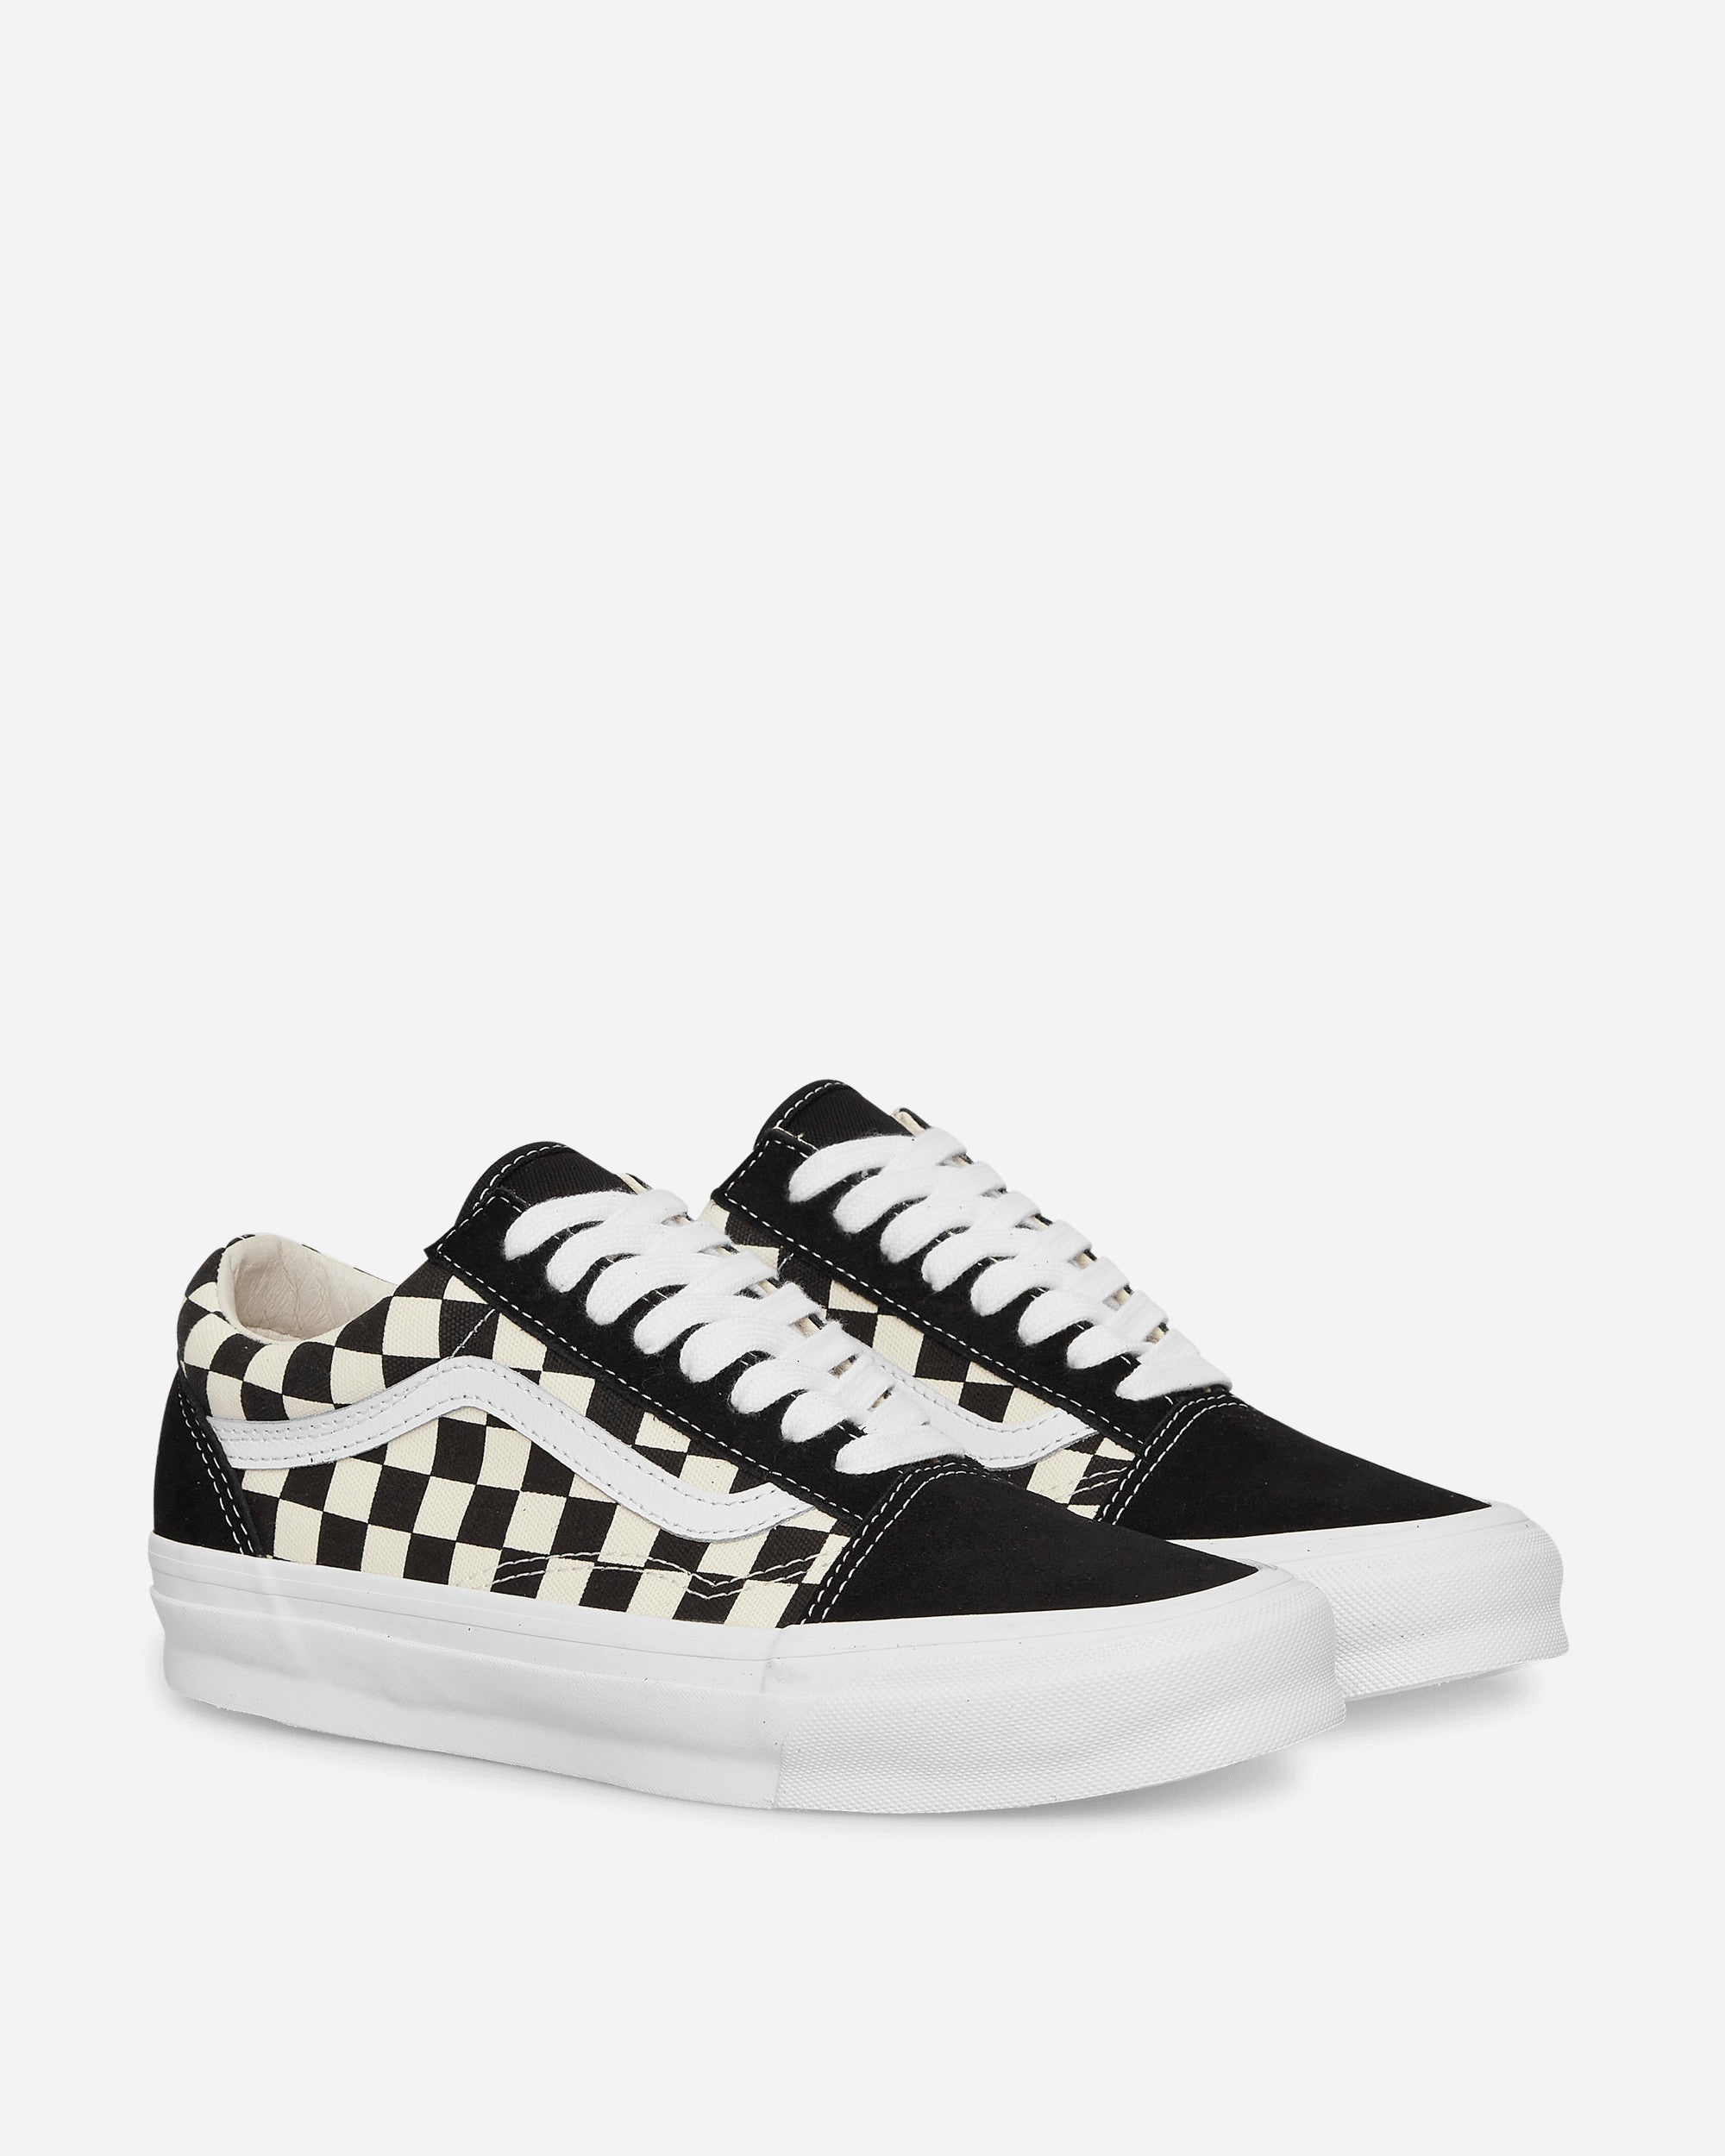 Vans Ua Og Old Skool Lx Black/Classic White Check Sneakers Low VN0A4P3X6391